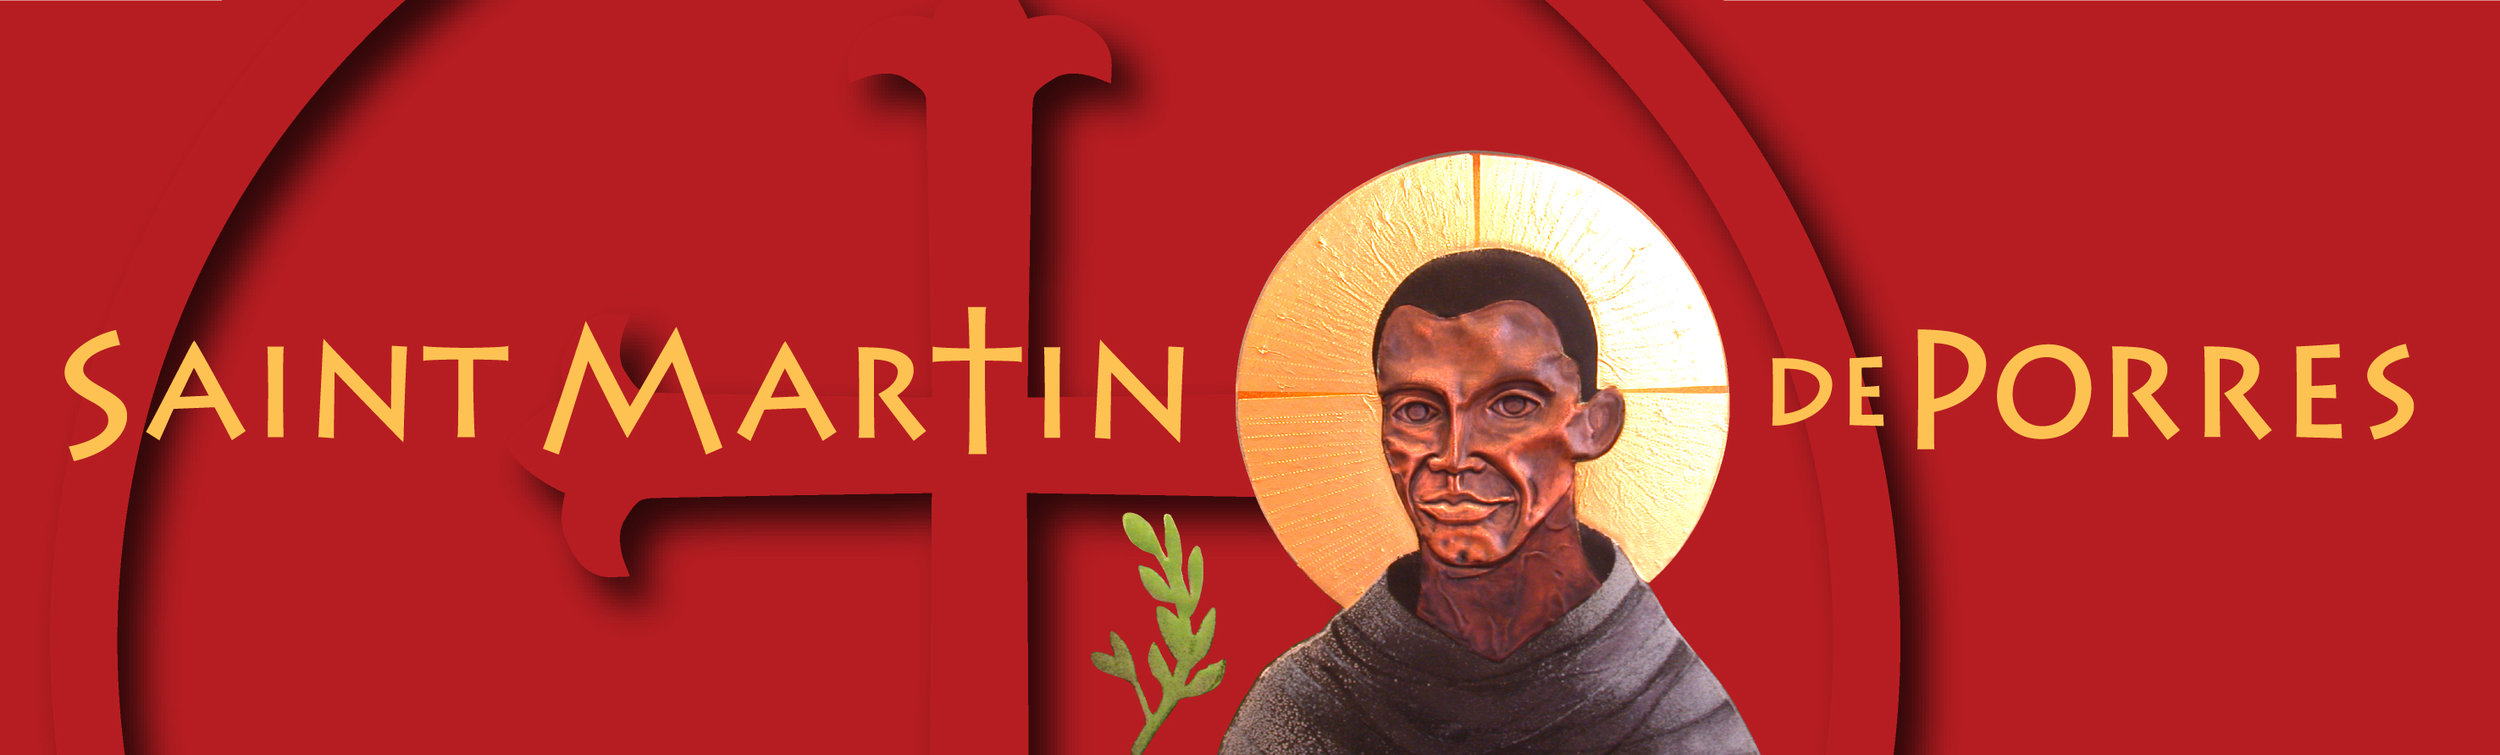  Branding creative and design by Chuck Mitchell  Pro bono work developed for St. Martin de Porres National Shrine &amp; Institute, Memphis  Enamel icon image of St. Martin by Pam Hassler 